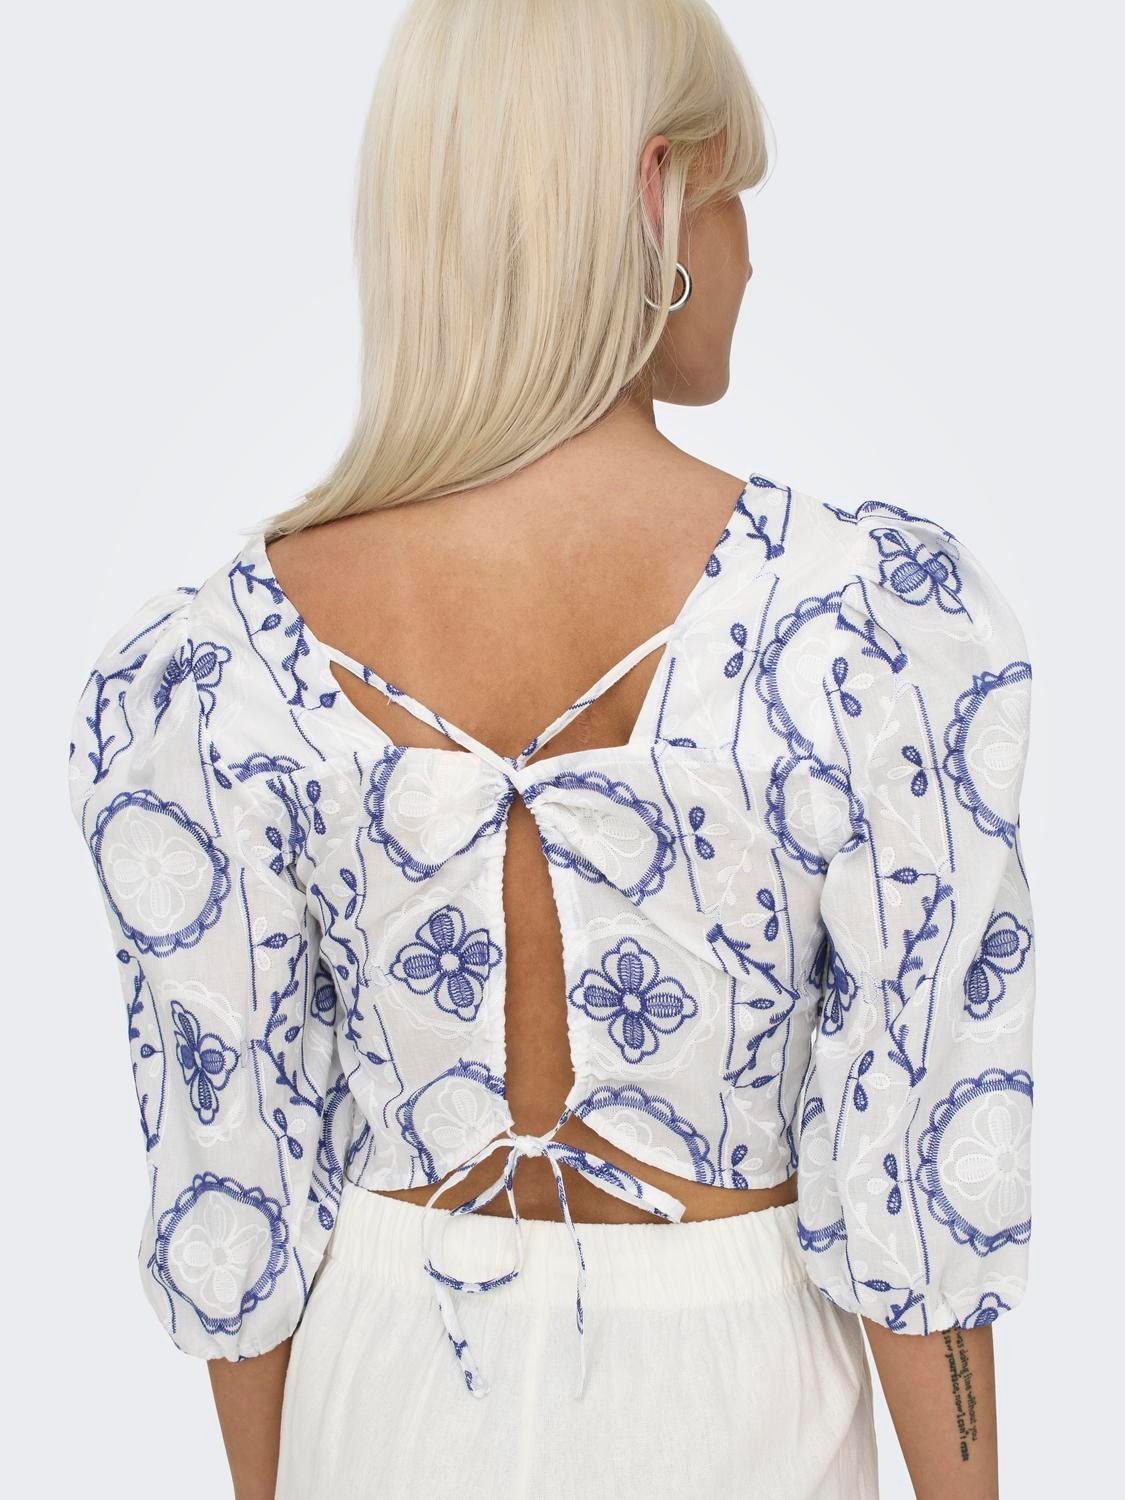 ONLY Cropped top with square neck -Bright White - 15319195